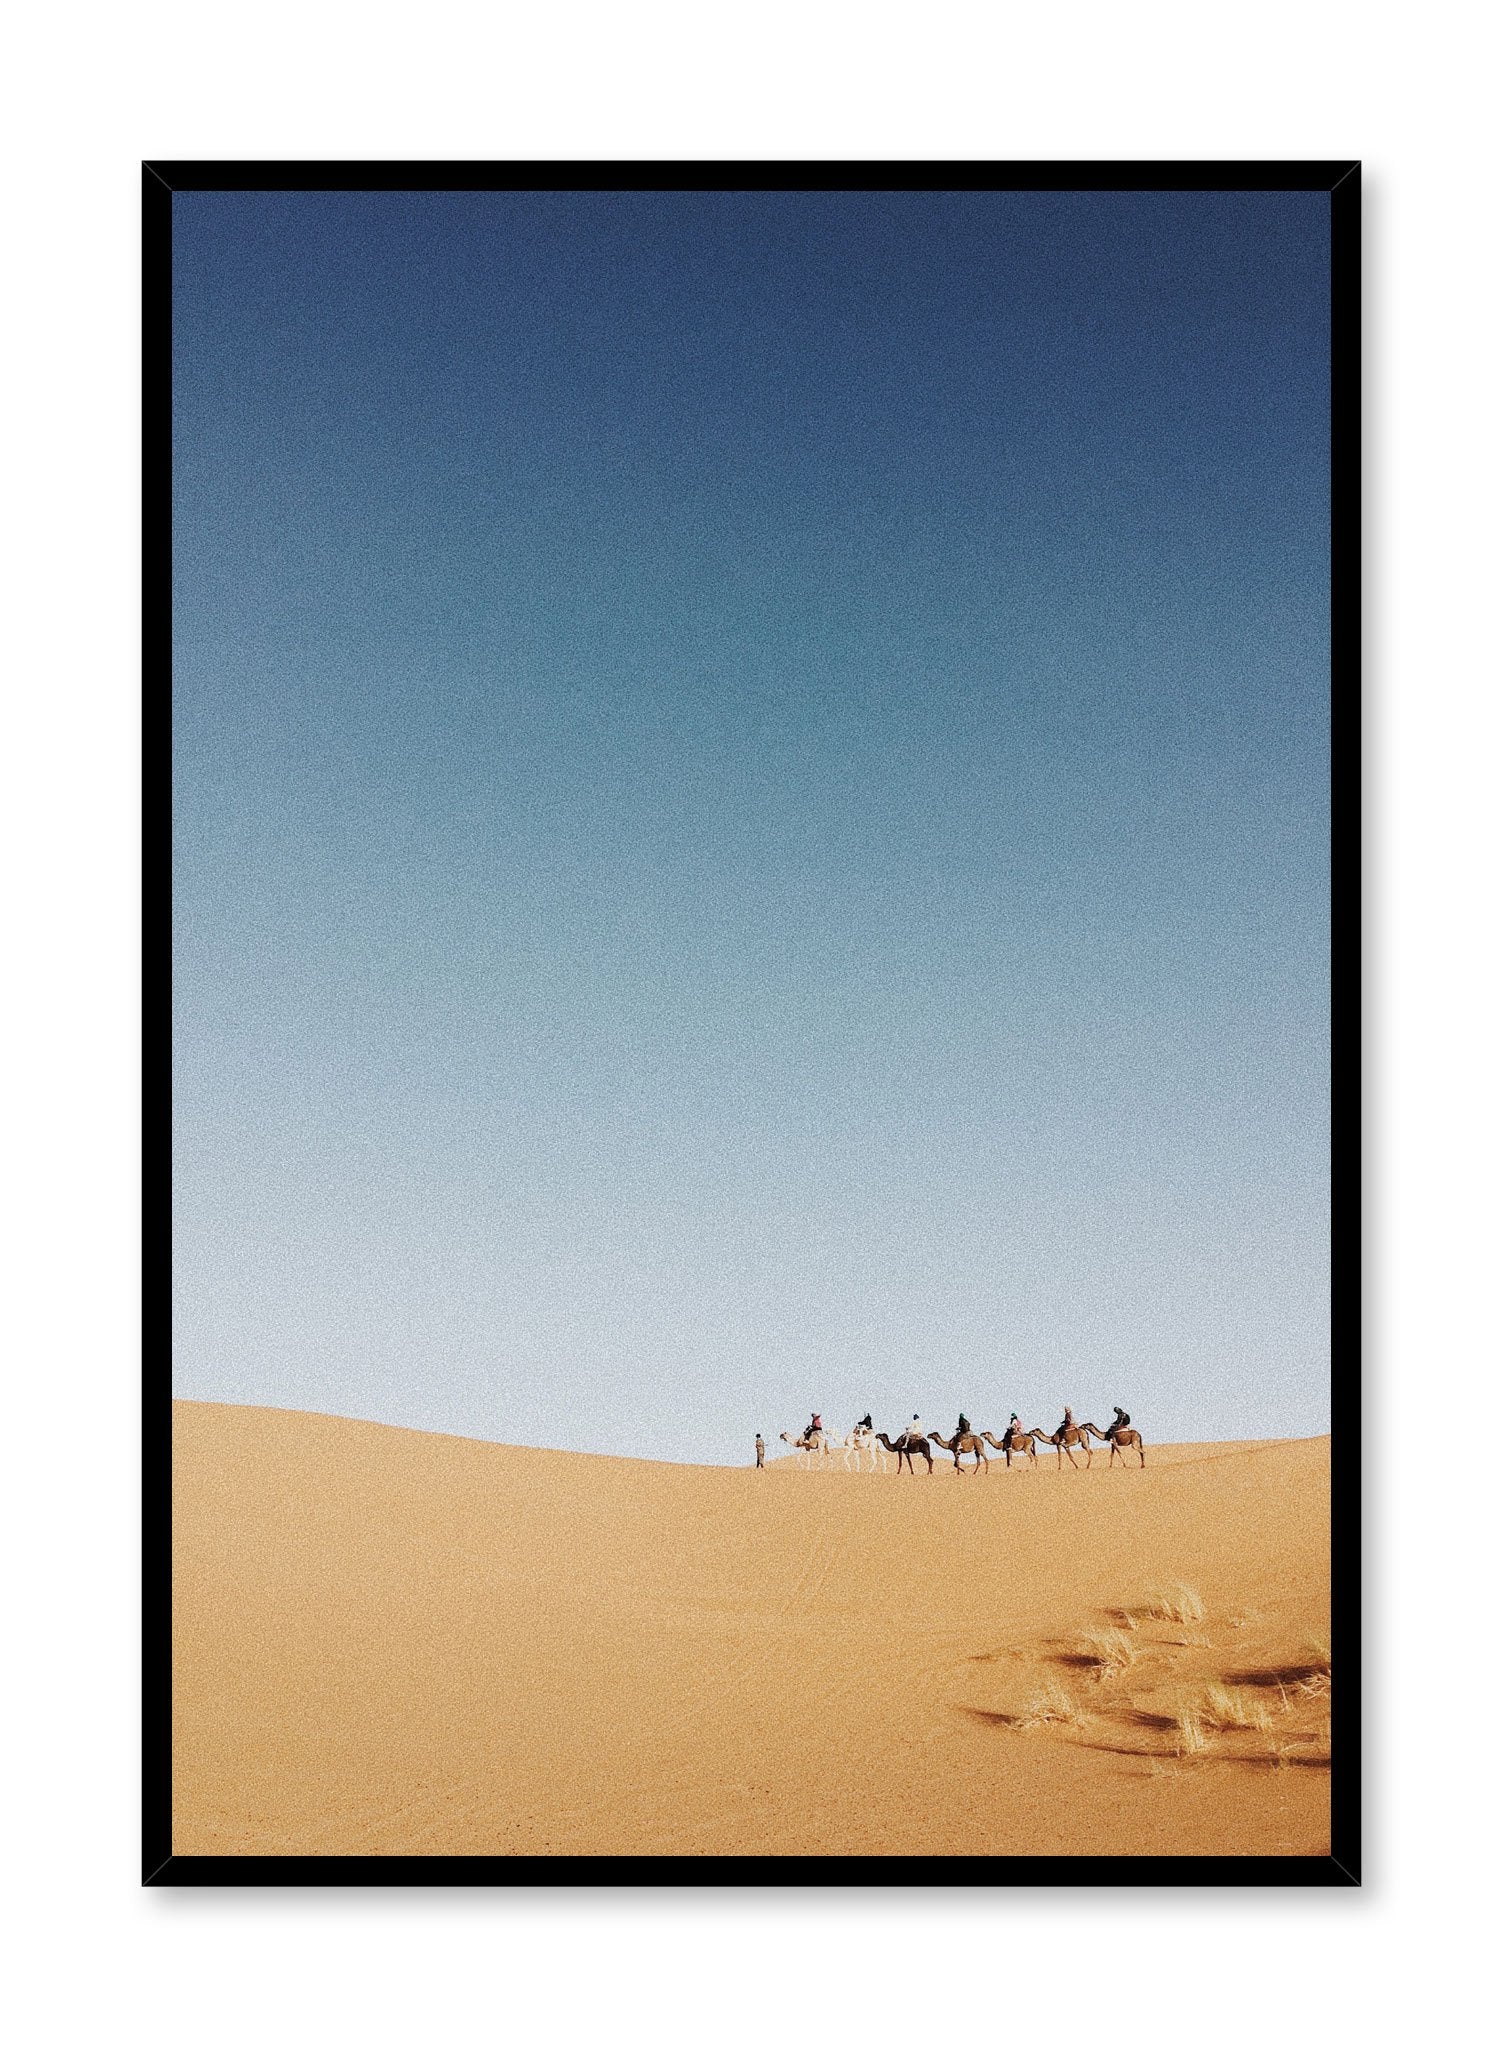 Modern minimalist poster by Opposite Wall with photography of camel Caravan in Sahara Desert